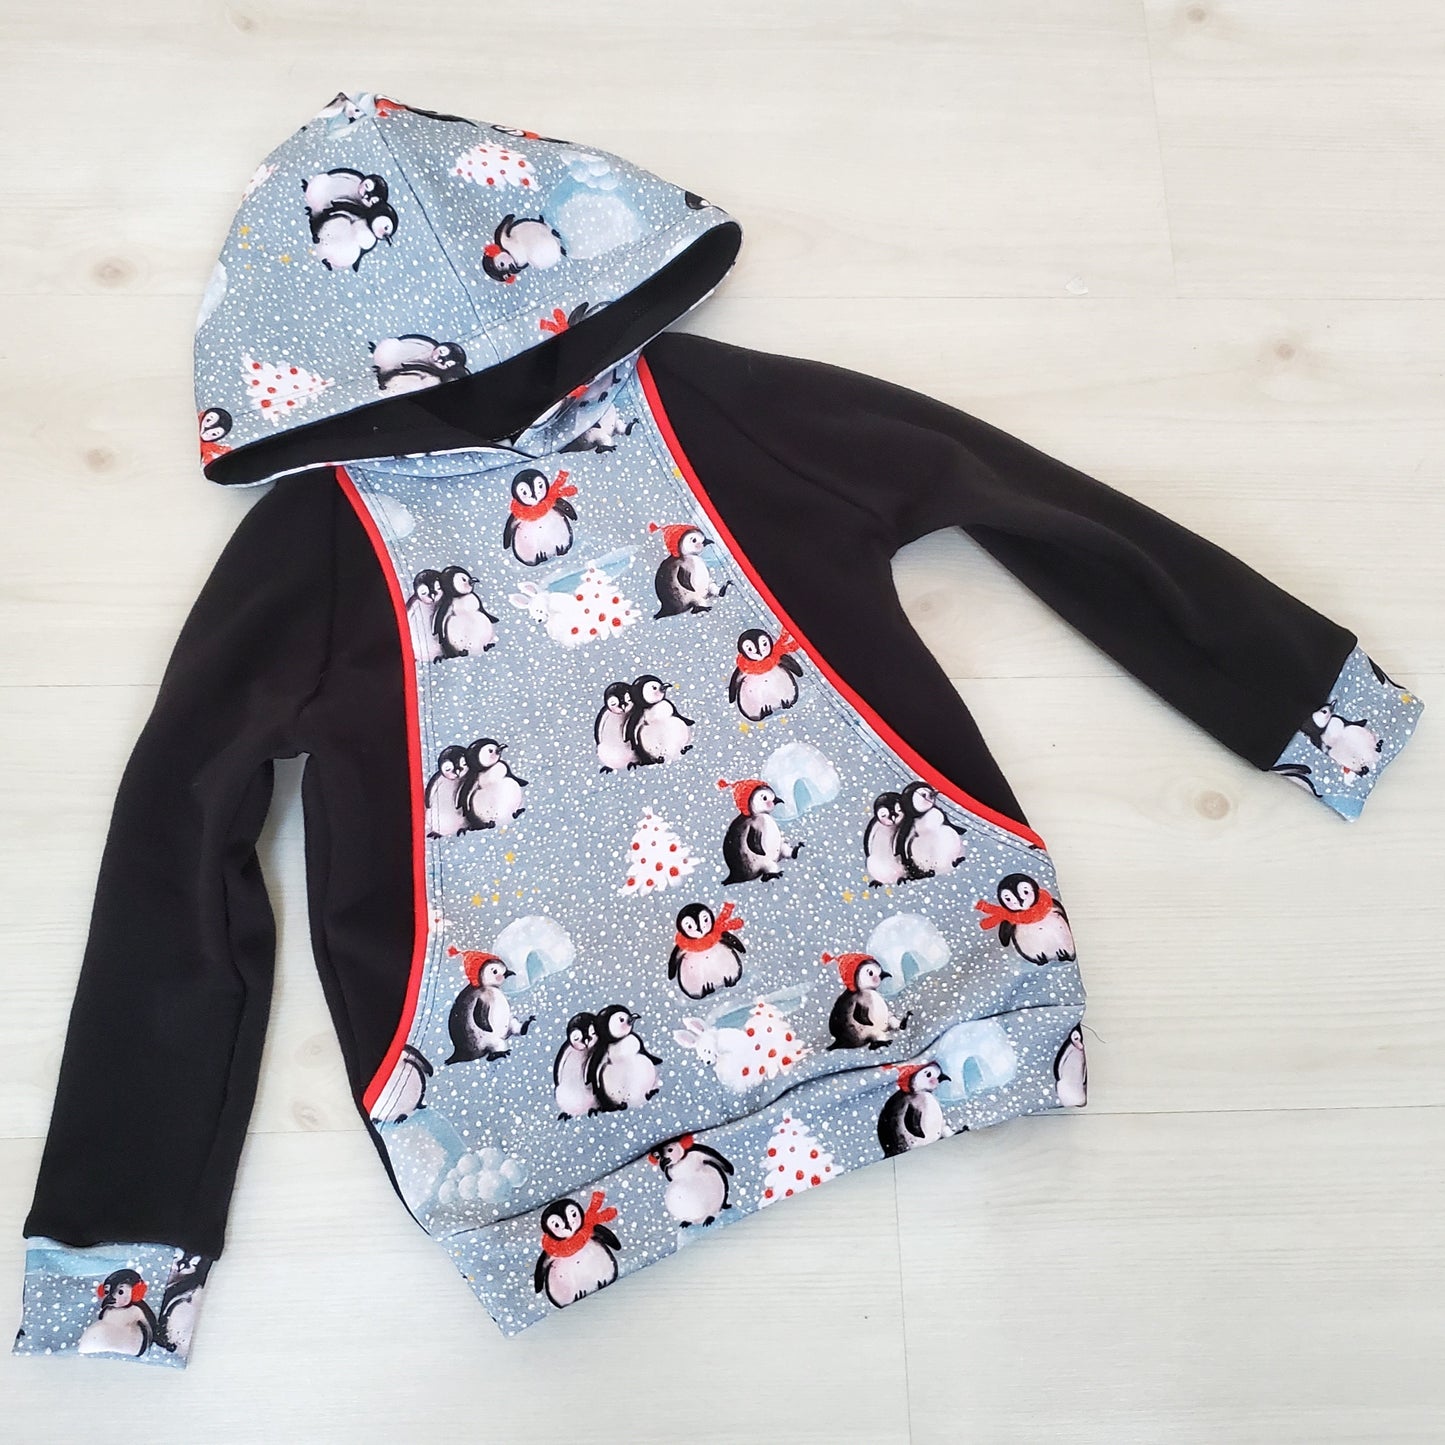 Penguin Pullover for Kids in Organic Cotton